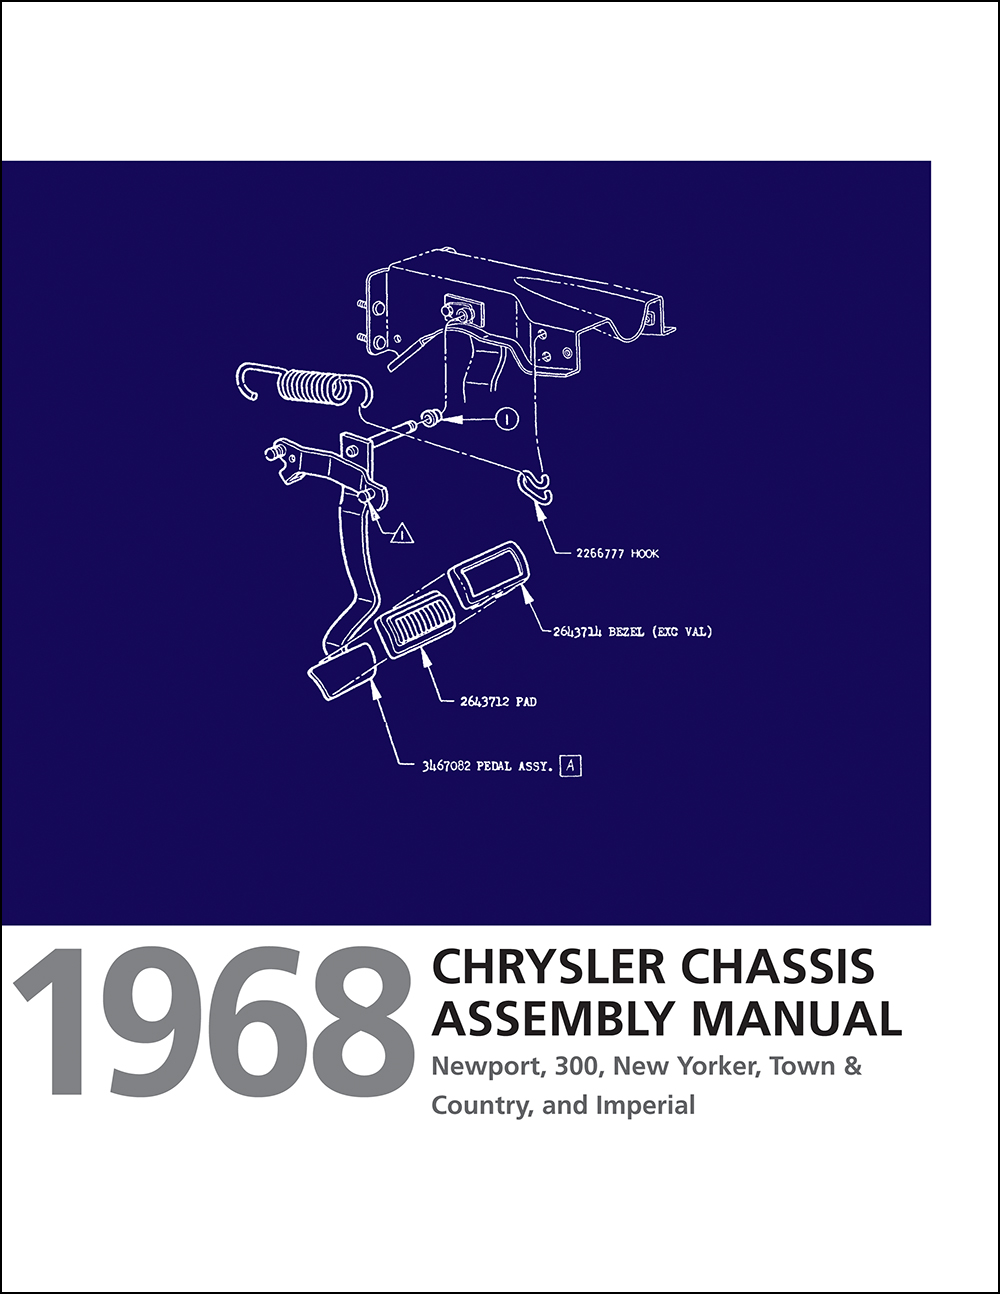 1968 Chrysler Chassis and Engine Equipment Assembly Manual Reprint